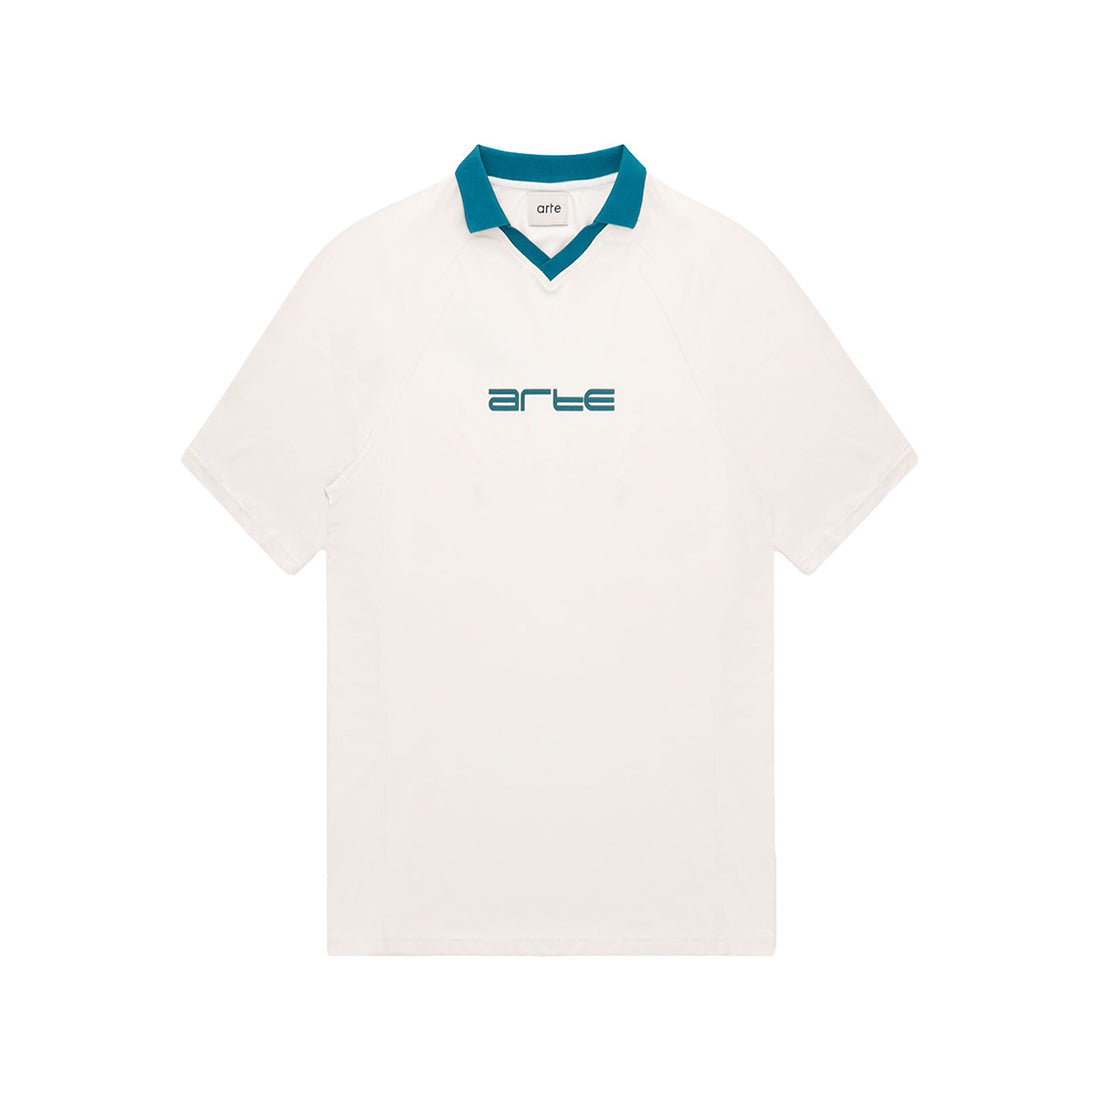 Taylor Collar T-Shirt - Off White